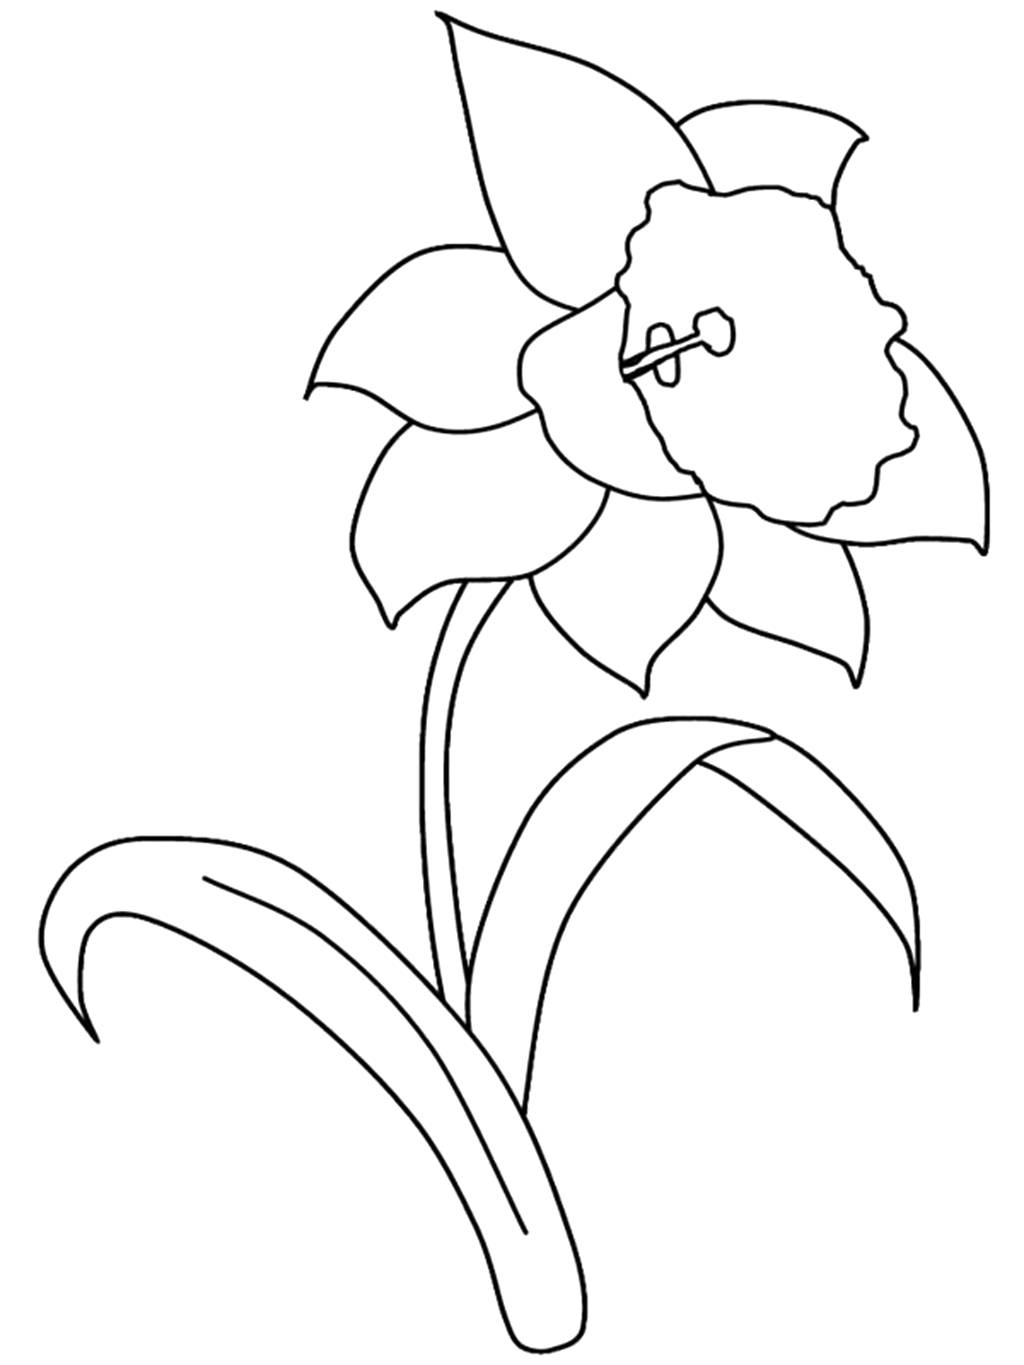 Daffodil Flower Coloring Page at GetColorings.com | Free printable ...